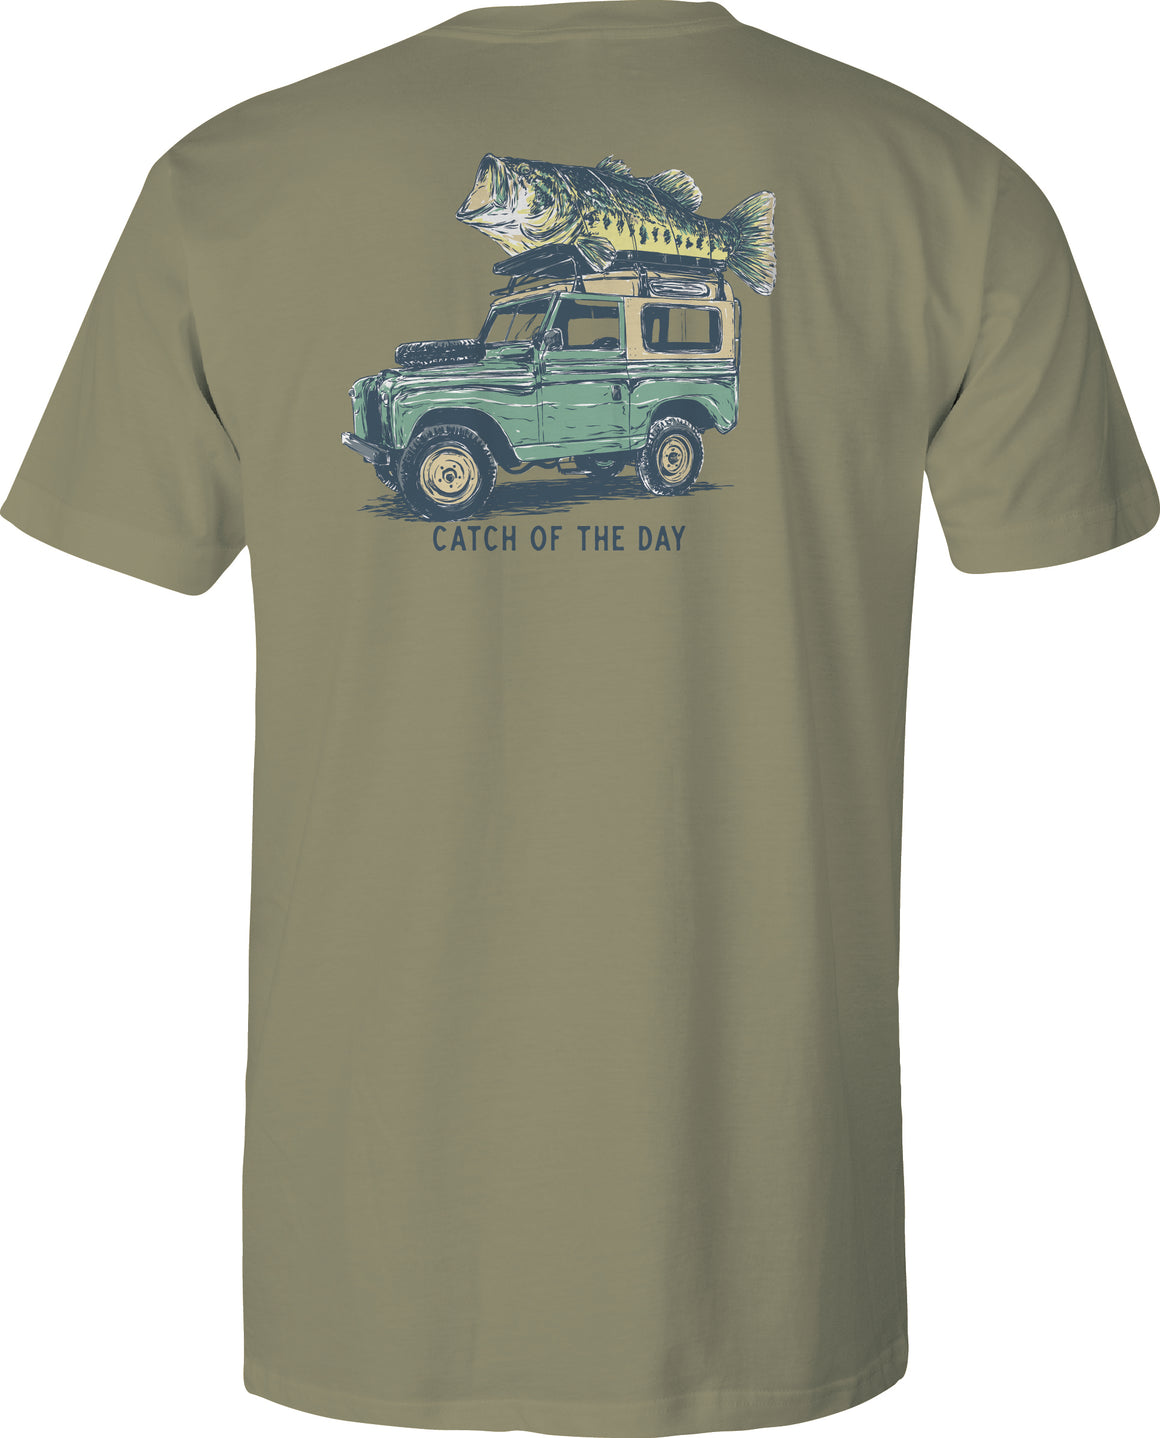 Youth & Toddler Short Sleeve Tee Catch of the Day V4 - Khaki